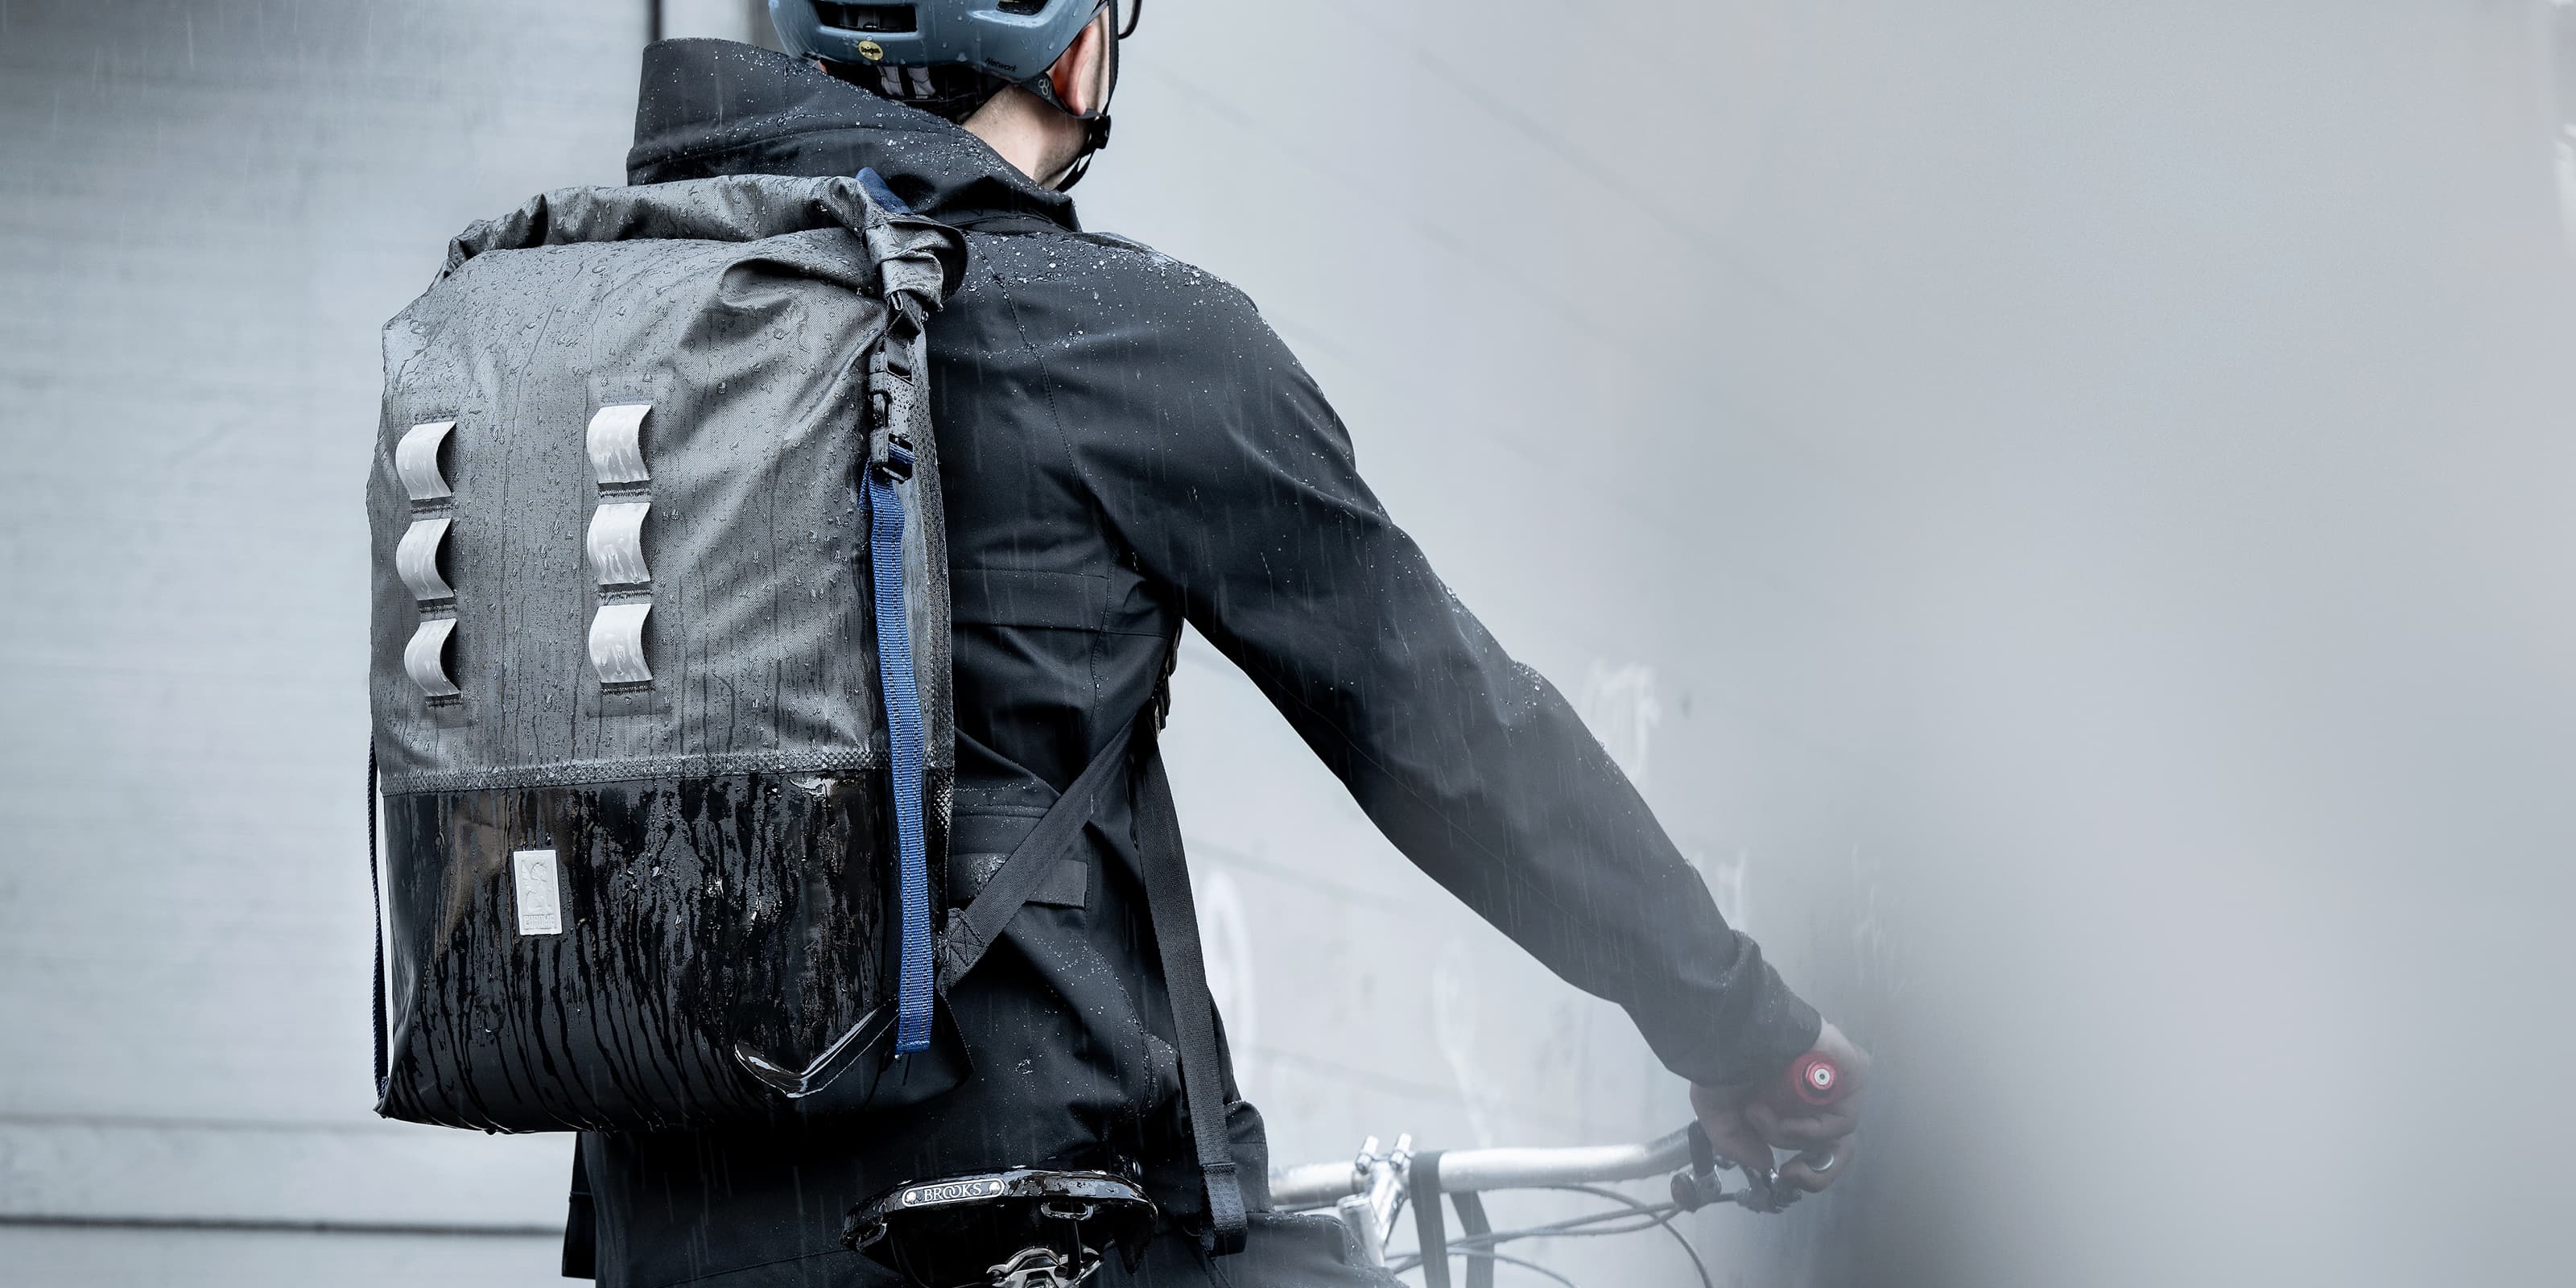 Urban Ex 30L Backpack worn by a guy on a bike in the rain desktop image size